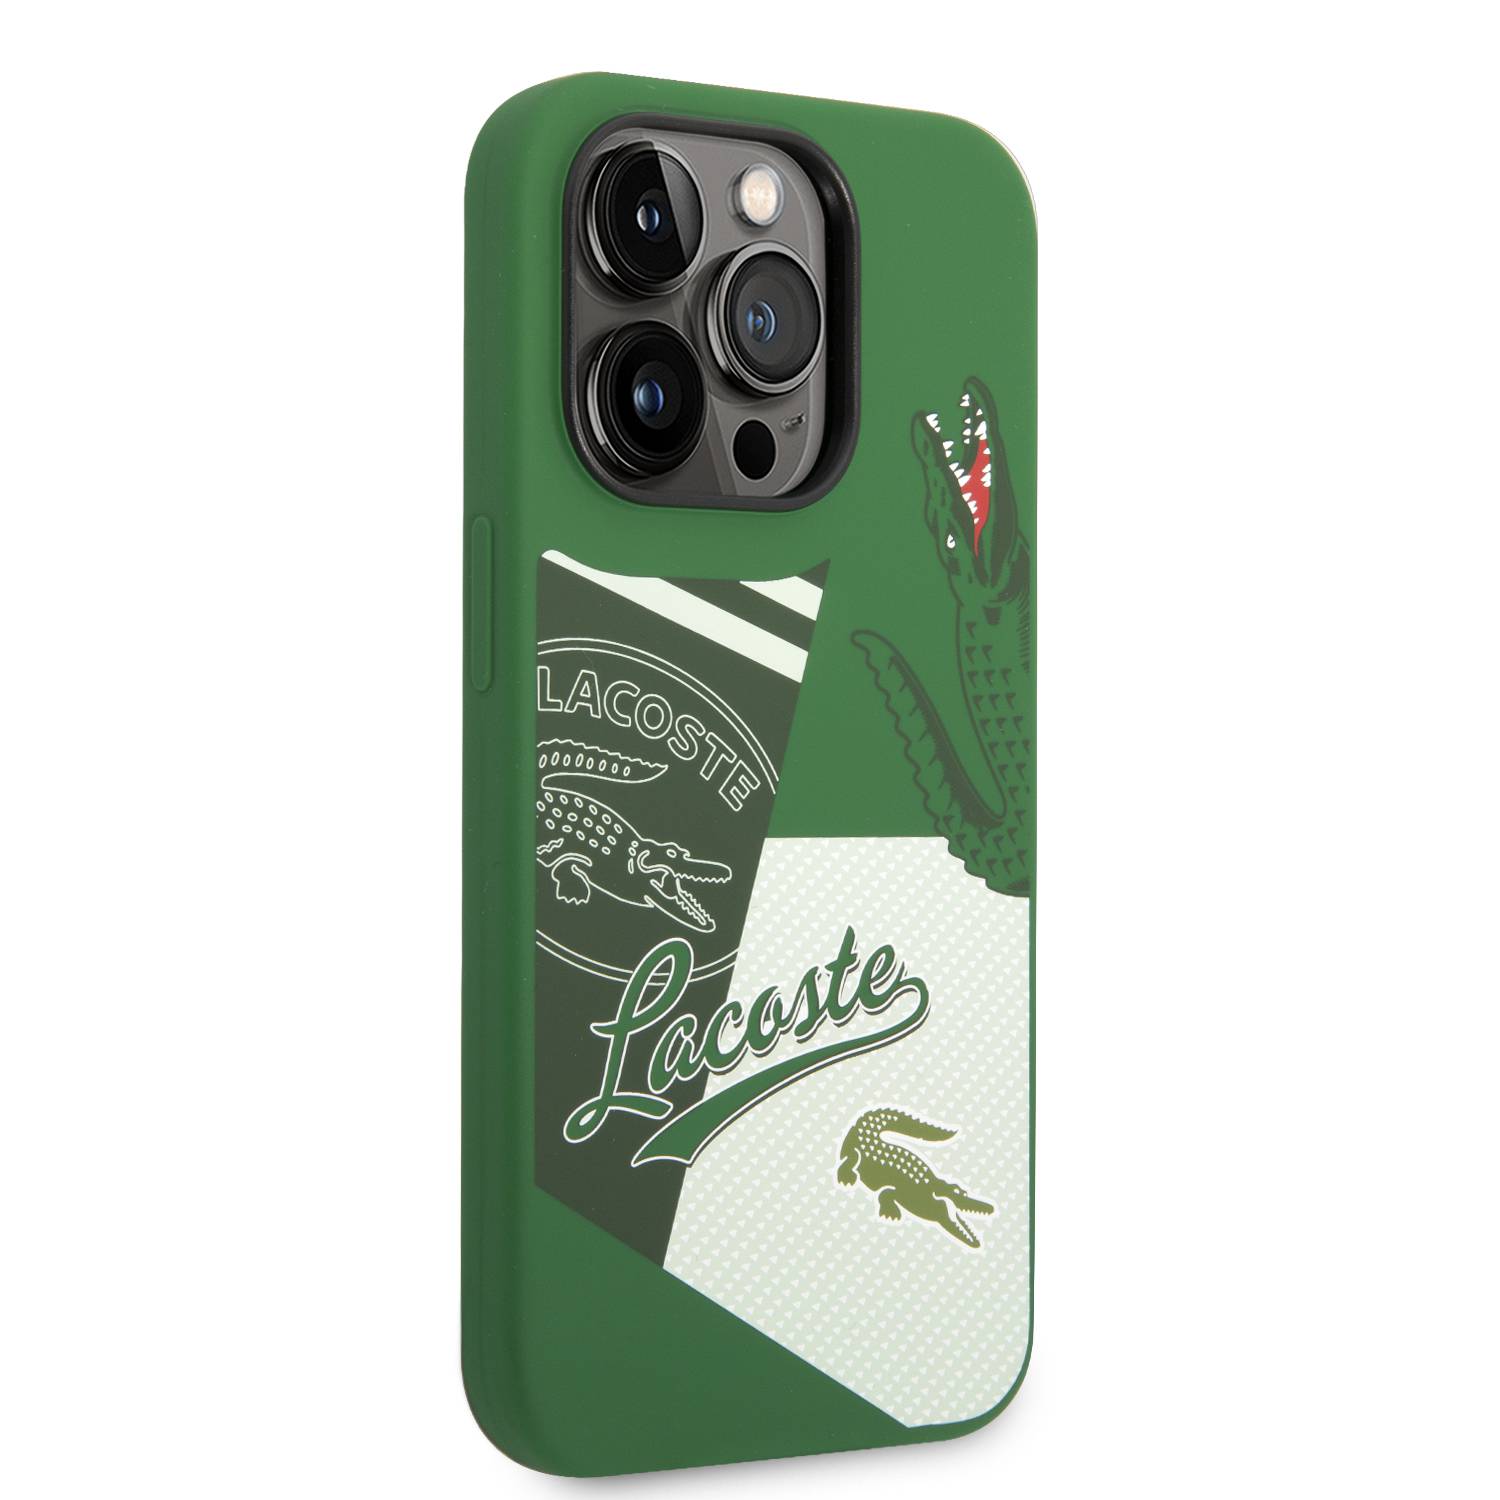 Compatible iPhone 14 Pro Case | Lacoste Hard Case | High Protection